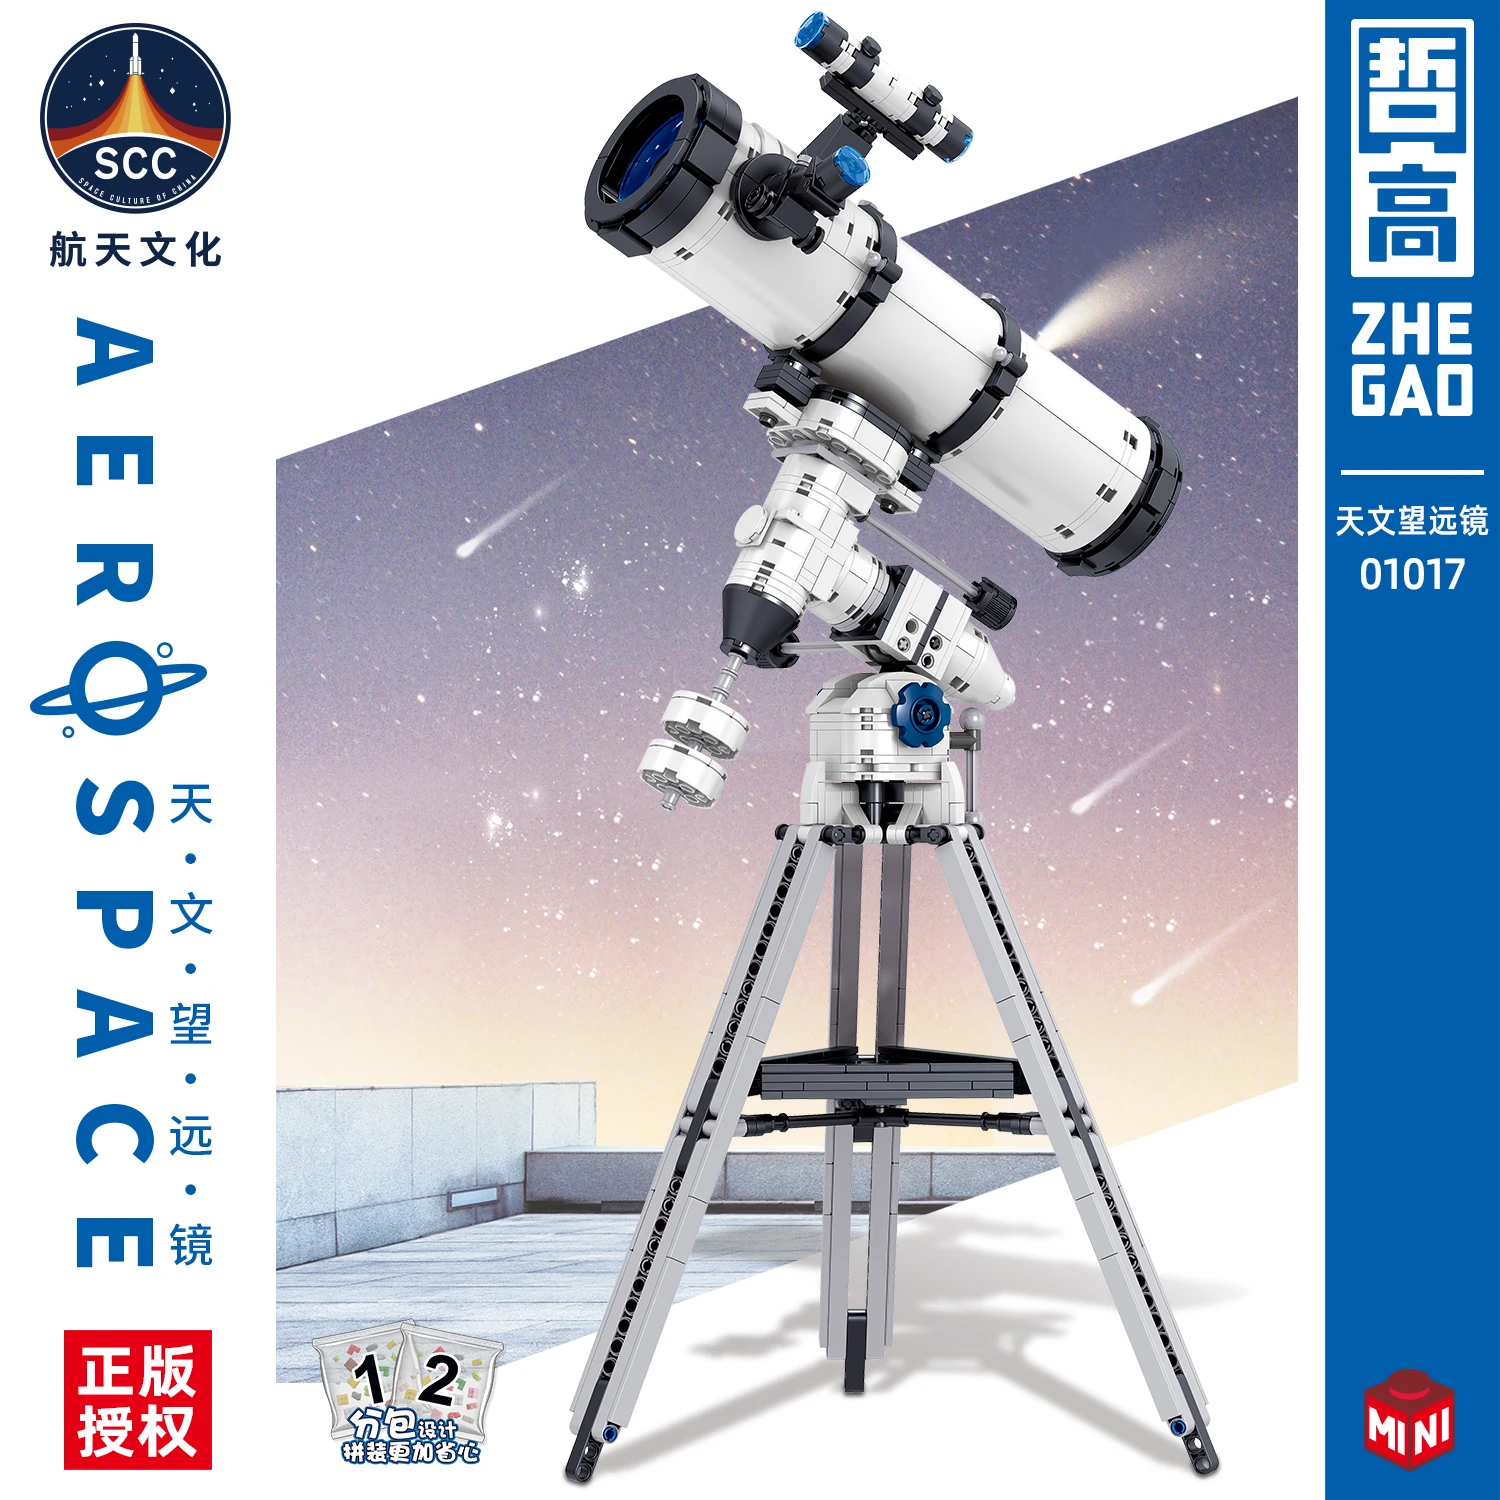 

ZHEGAO Mini Particle Building Blocks 01017 Astronomical Telescope Model Astronomy Enthusiasts Must-have Children's Gifts